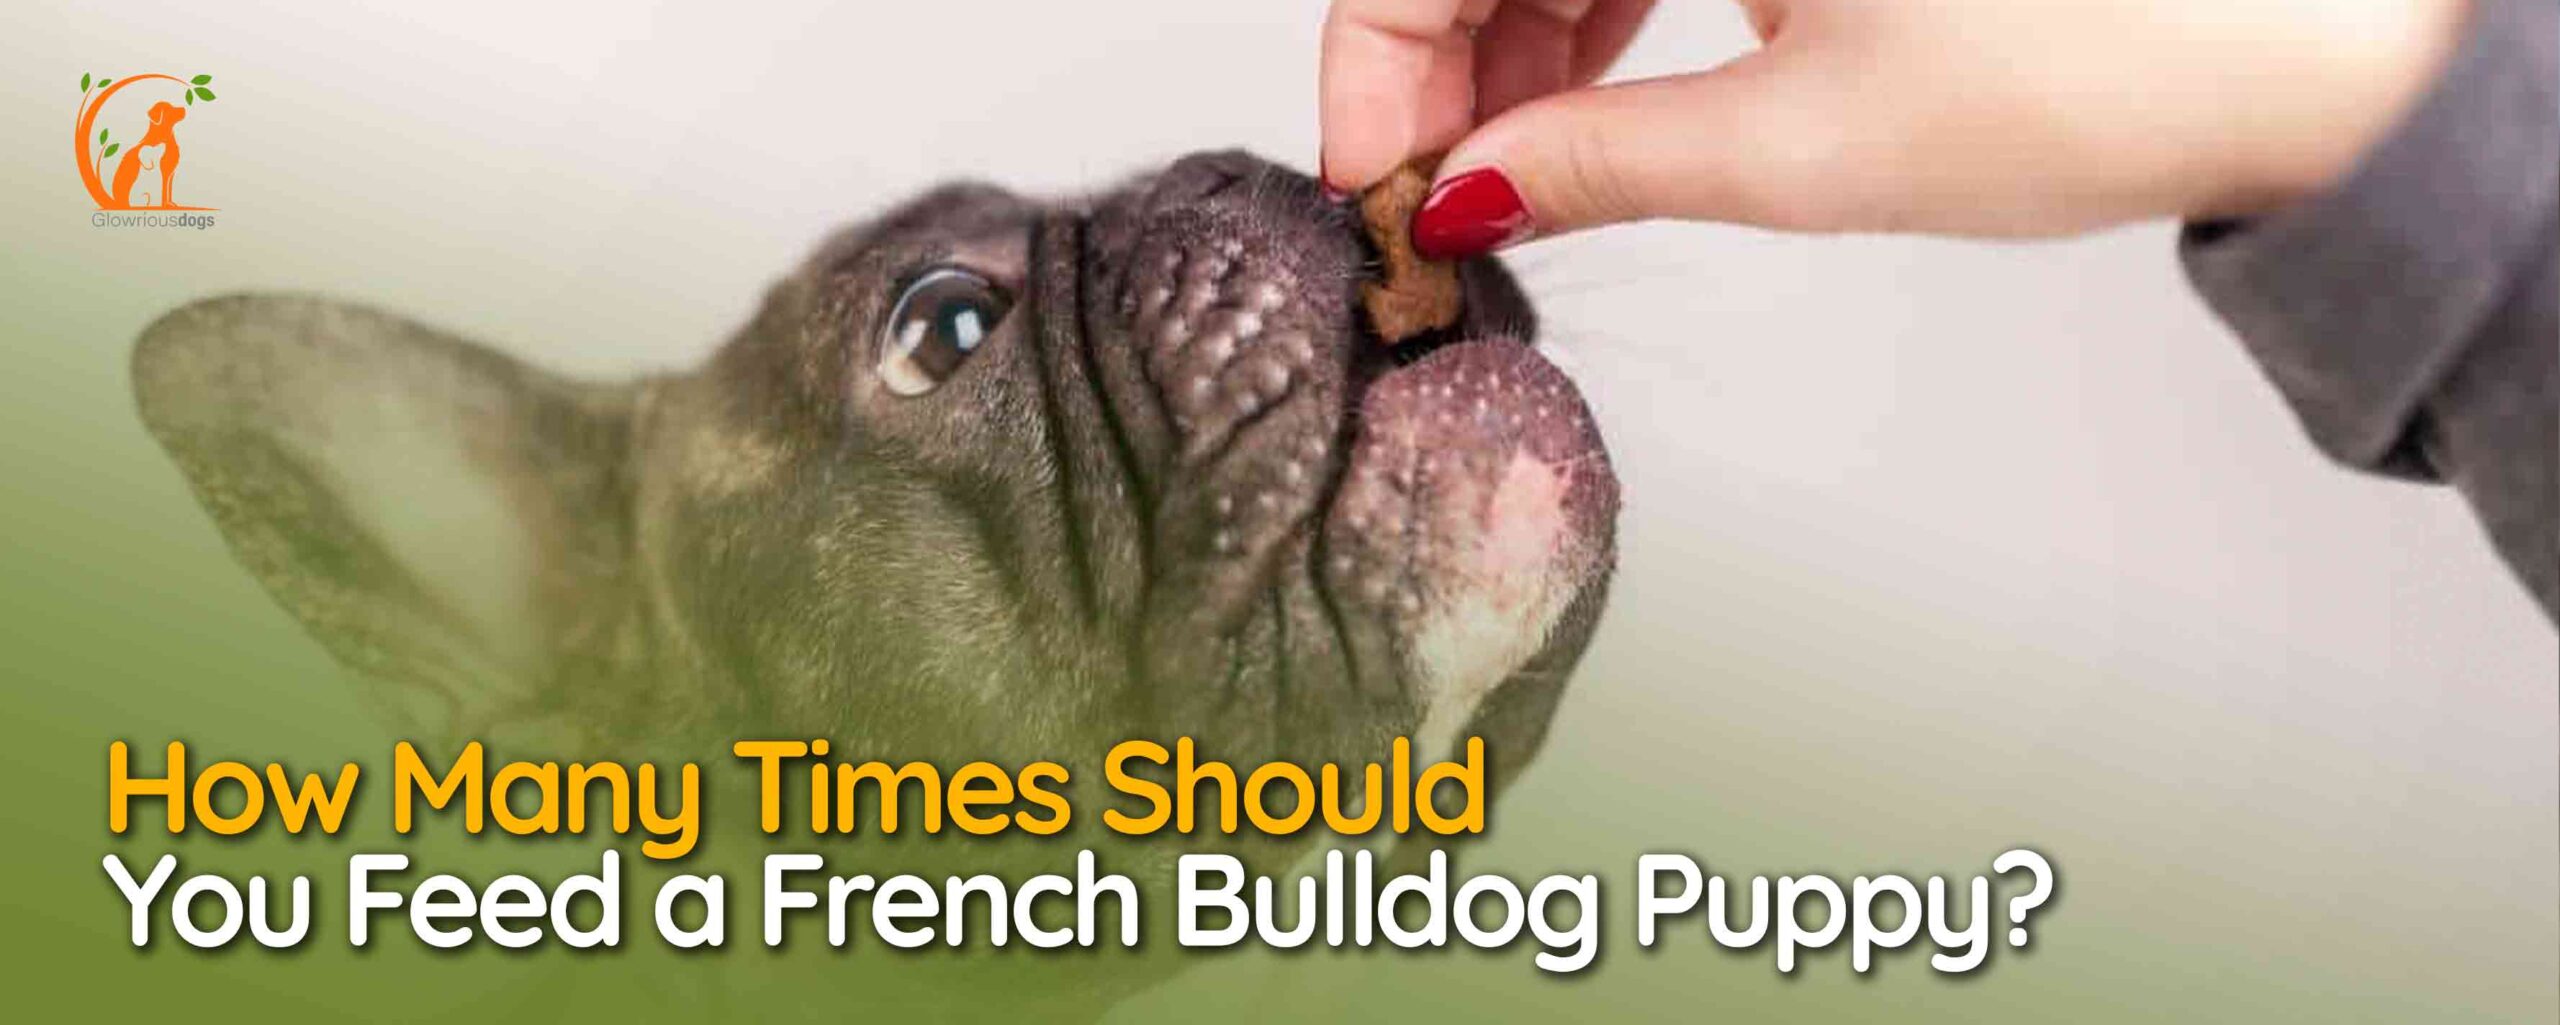 How Many Times Should You Feed a French Bulldog Puppy